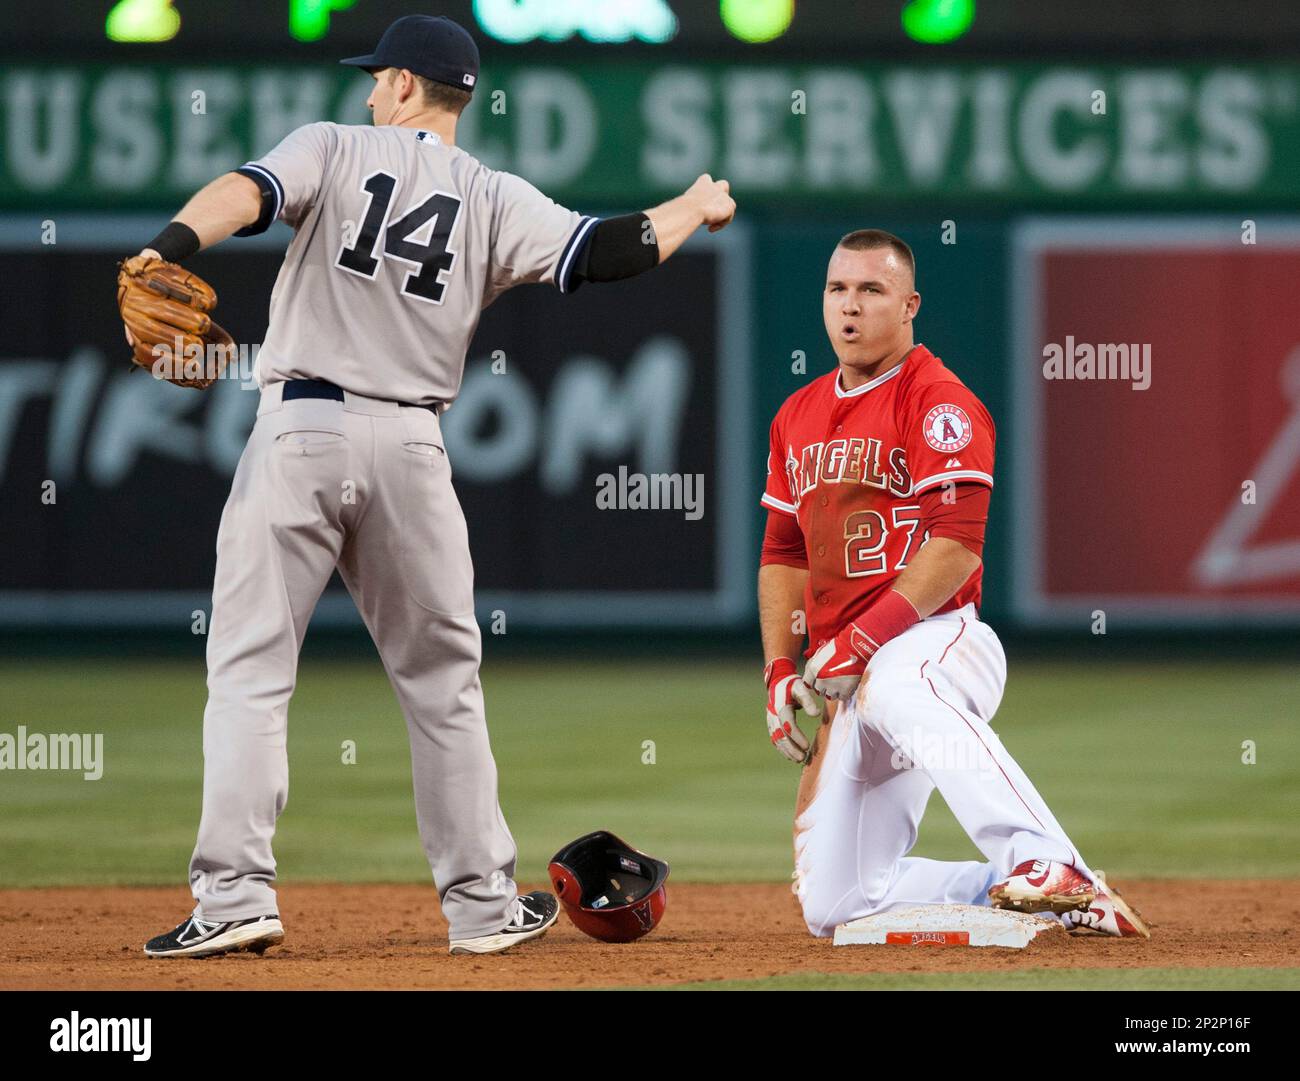 The Angels' Mike Trout looks surprised after being called out